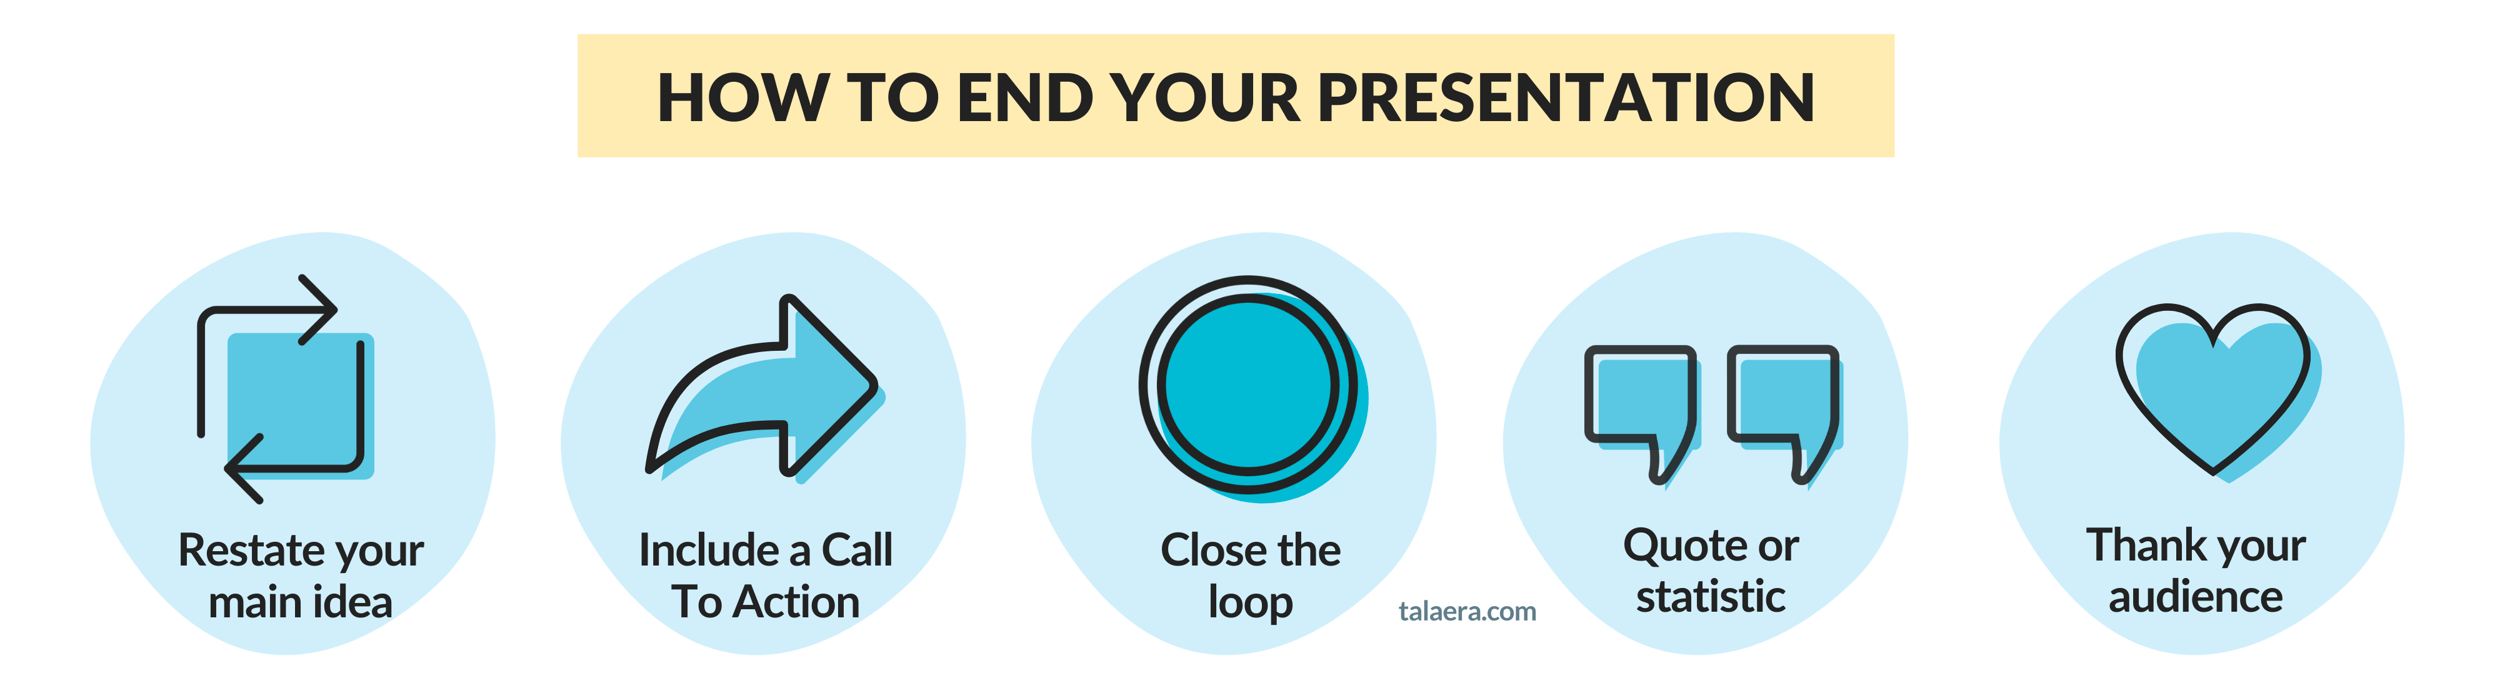 how to end a presentation deck